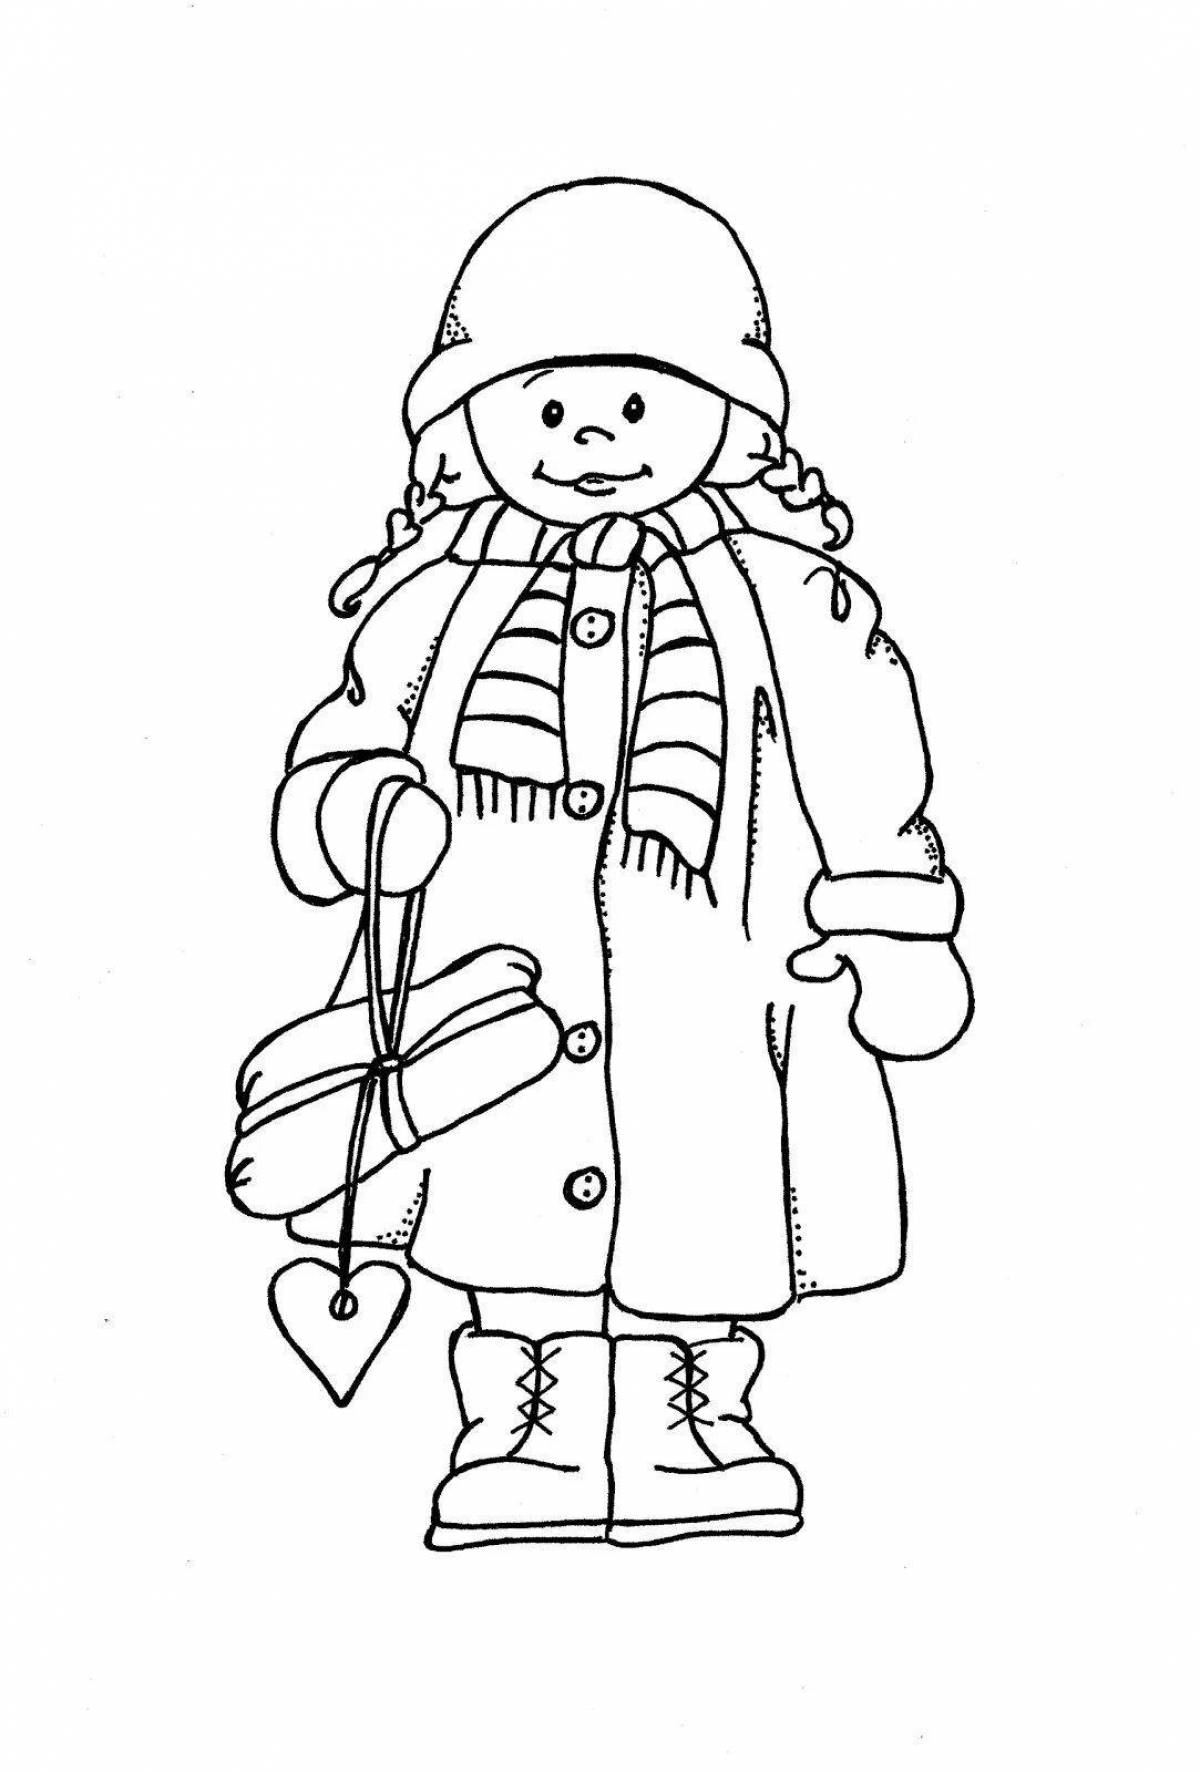 Awesome winter clothes coloring page for 5-6 year olds